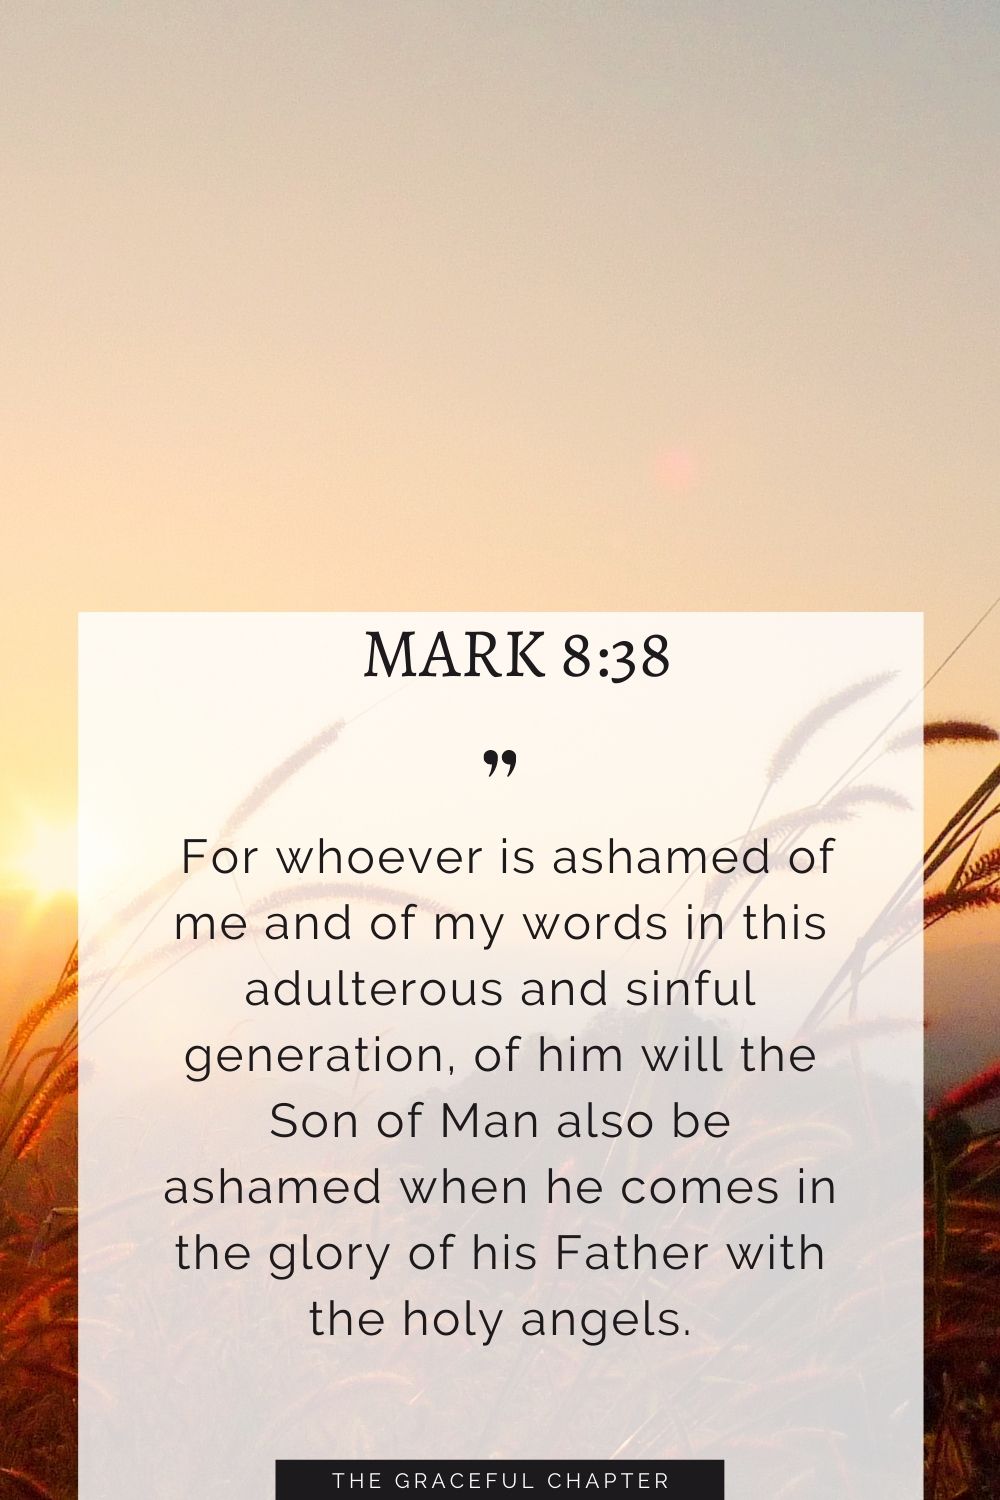 For whoever is ashamed of me and of my words in this adulterous and sinful generation, of him will the Son of Man also be ashamed when he comes in the glory of his Father with the holy angels.” Mark 8:38